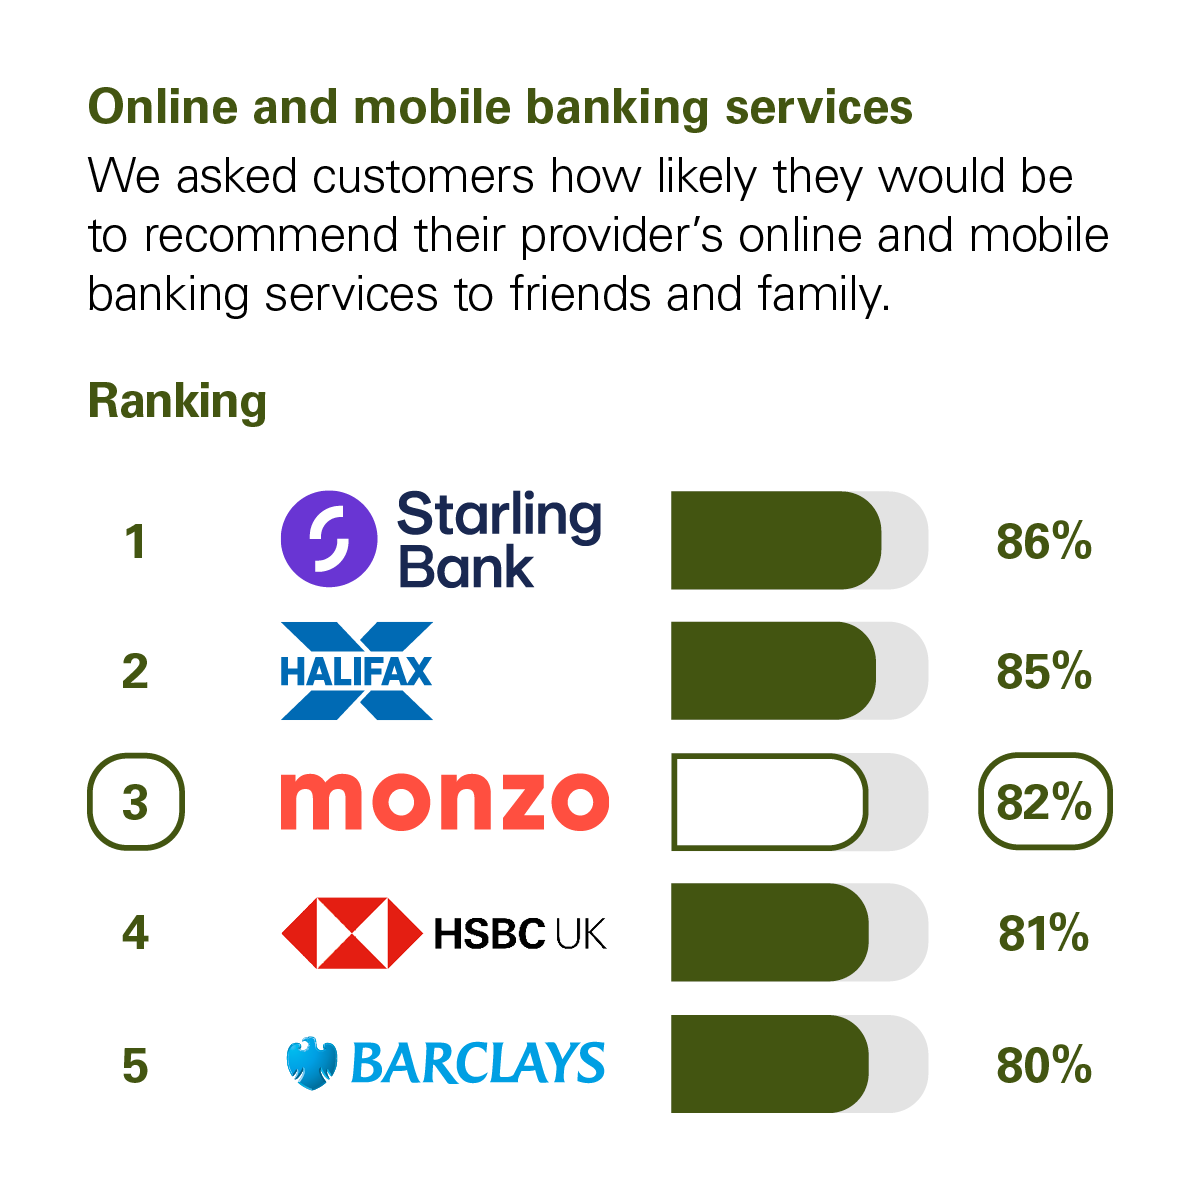 Graph showing the results of the CMA scoring of UK banks in the Online and Mobile Banking Services category. The CMA asked customers how likely they would be to recommend their provider's online and mobile banking services to friends and family. The rankings with percentage scores are: 1st Starling Bank with 86%. 2nd Halifax 85%. 3rd Monzo with 82%. 4th HSBC with 81%. 5th Barclays with 80%.